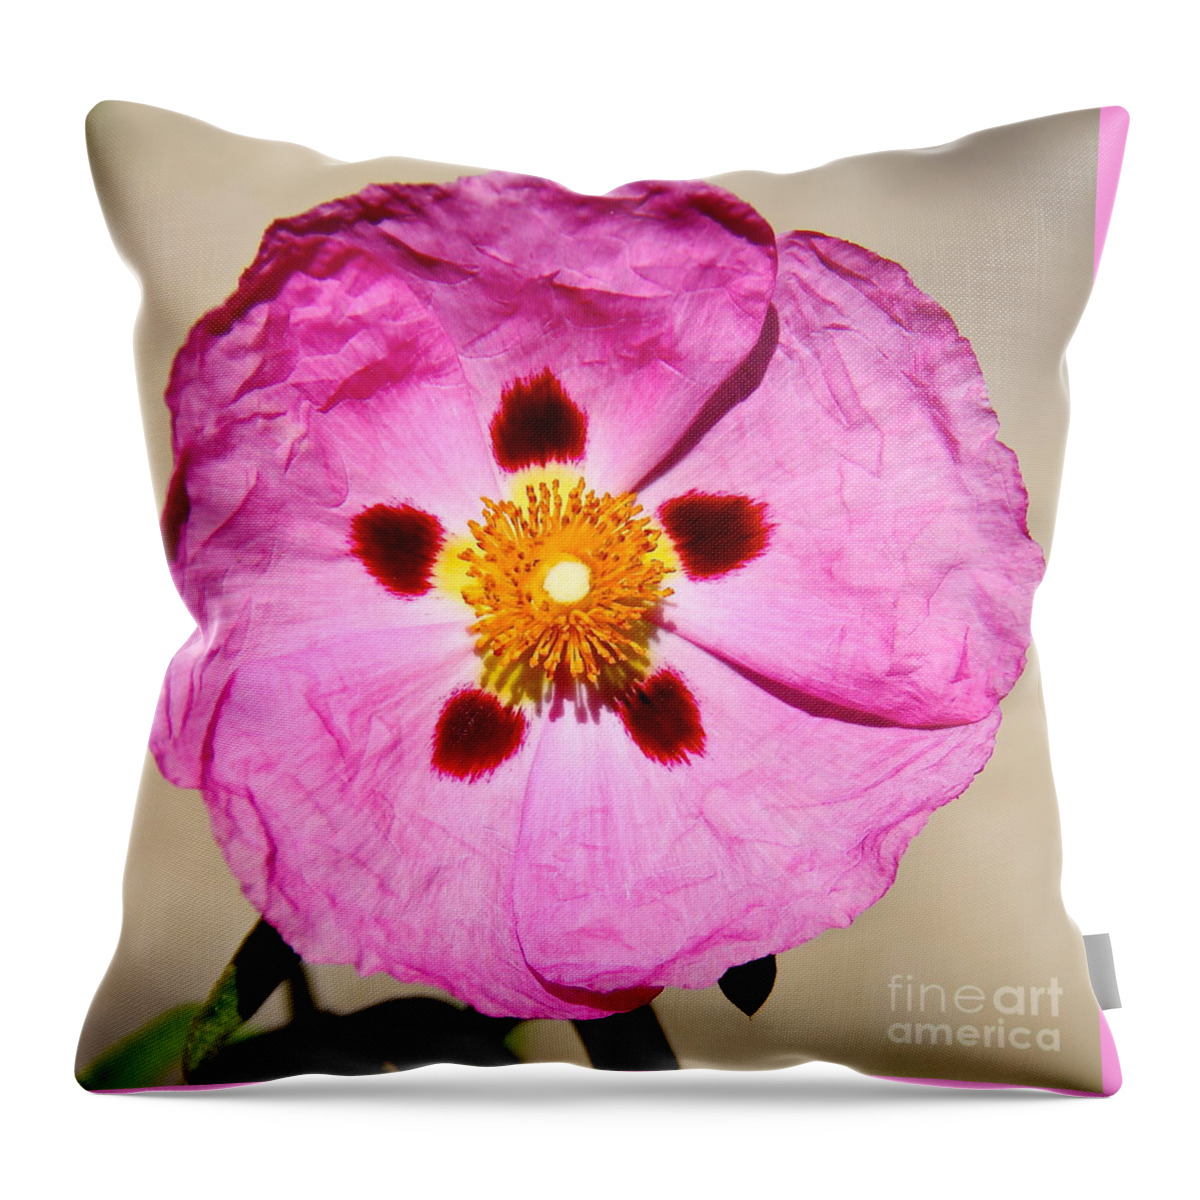 Rock Rose Throw Pillow featuring the photograph Pink Rock Rose by Suzanne Oesterling